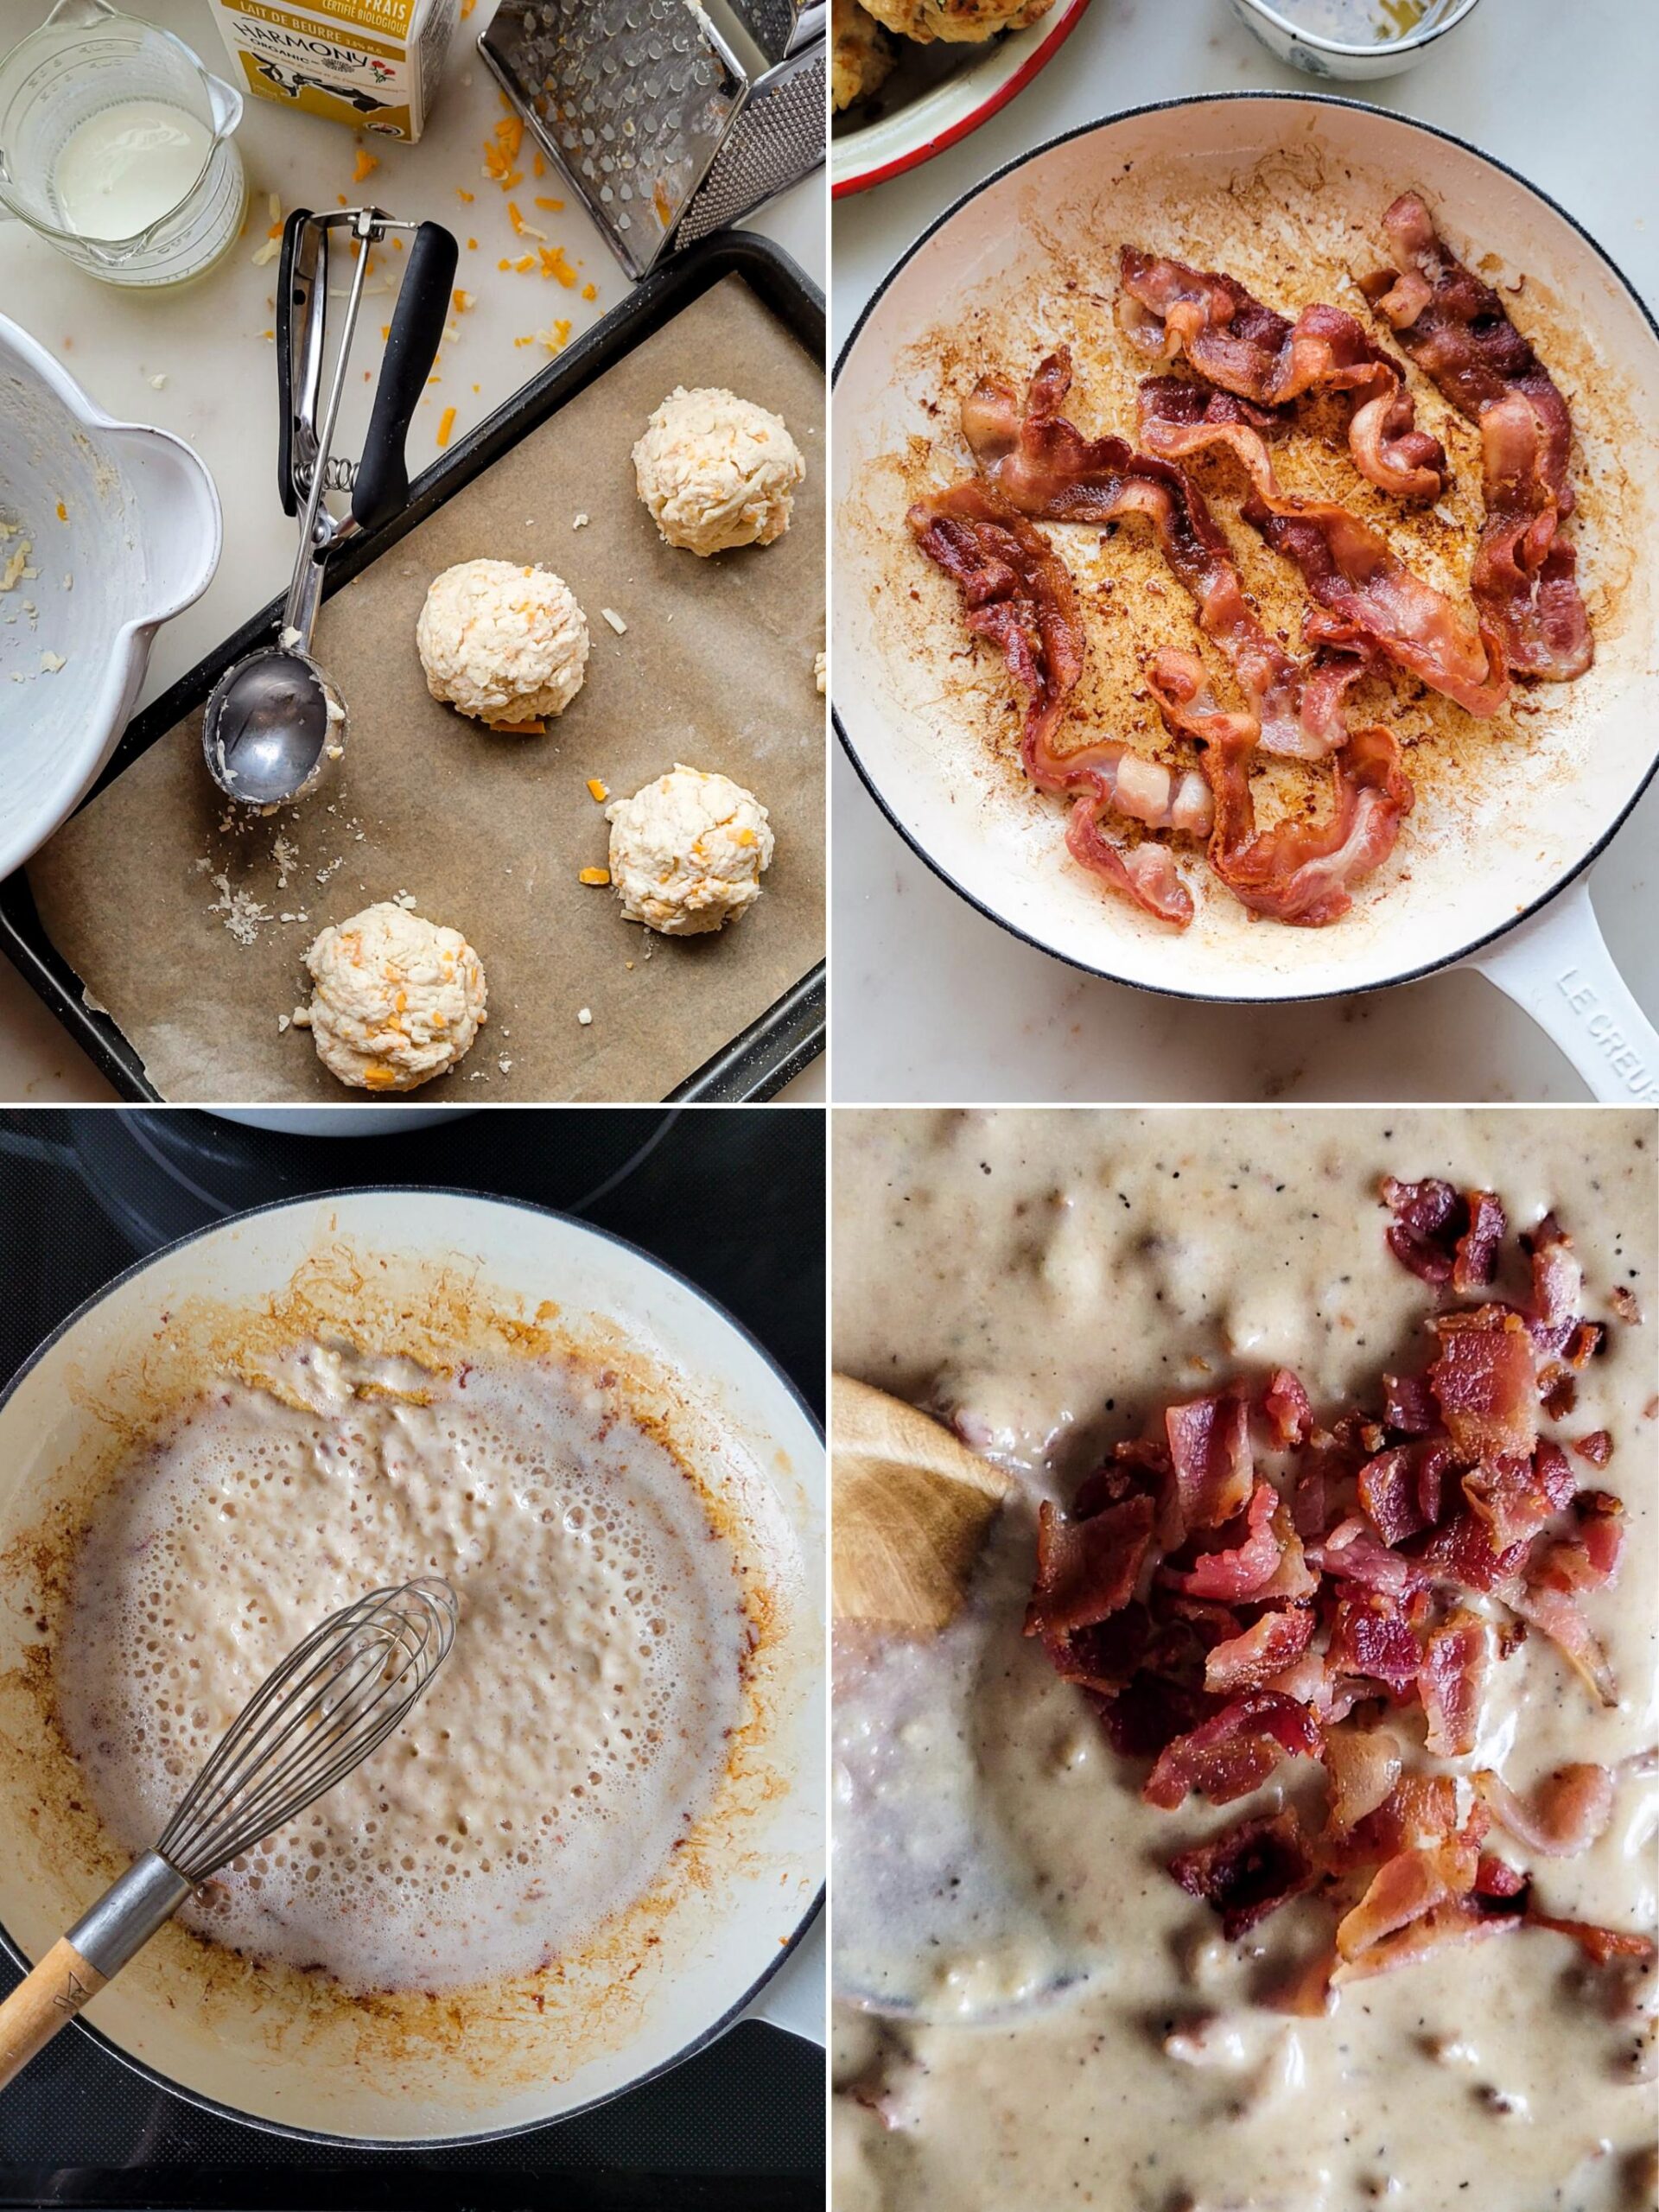 Collage showing making of the Easy Cheddar Biscuits and Bacon Gravy.